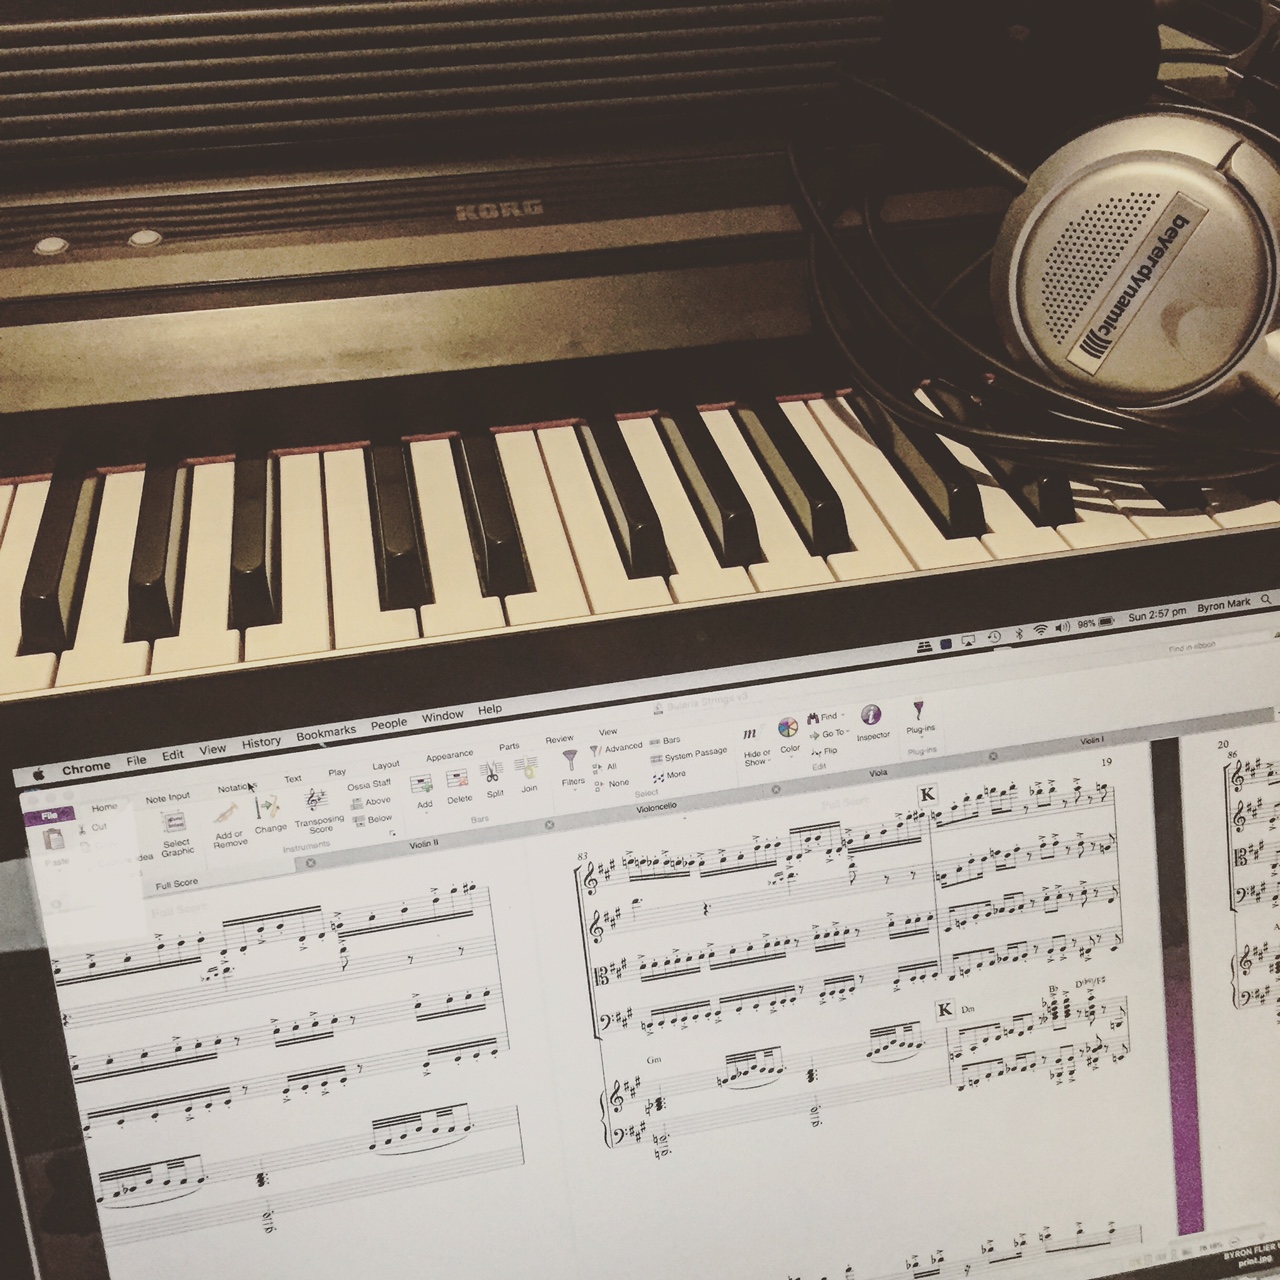 Time To Compose Again!